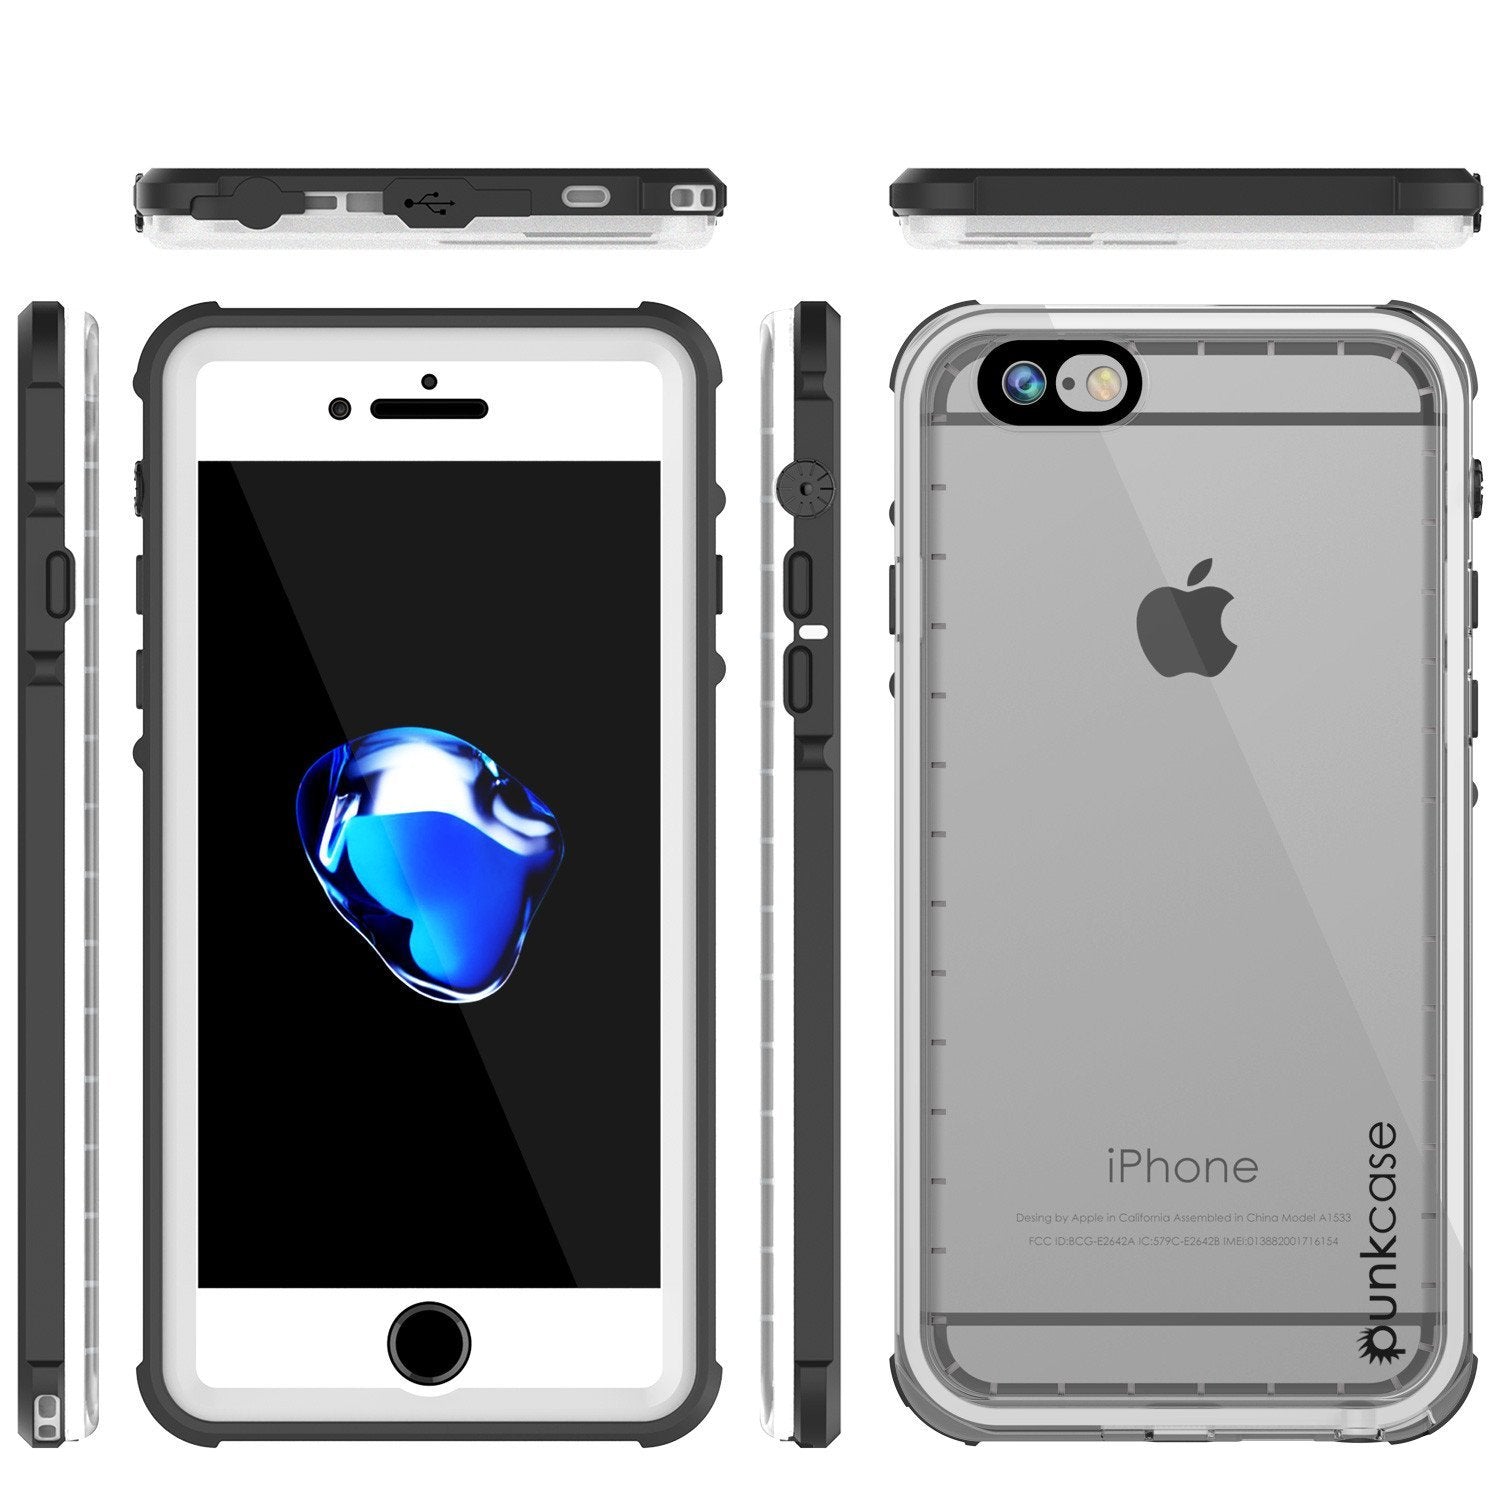 Apple iPhone 8 Waterproof Case, PUNKcase CRYSTAL White W/ Attached Screen Protector  | Warranty (Color in image: White)